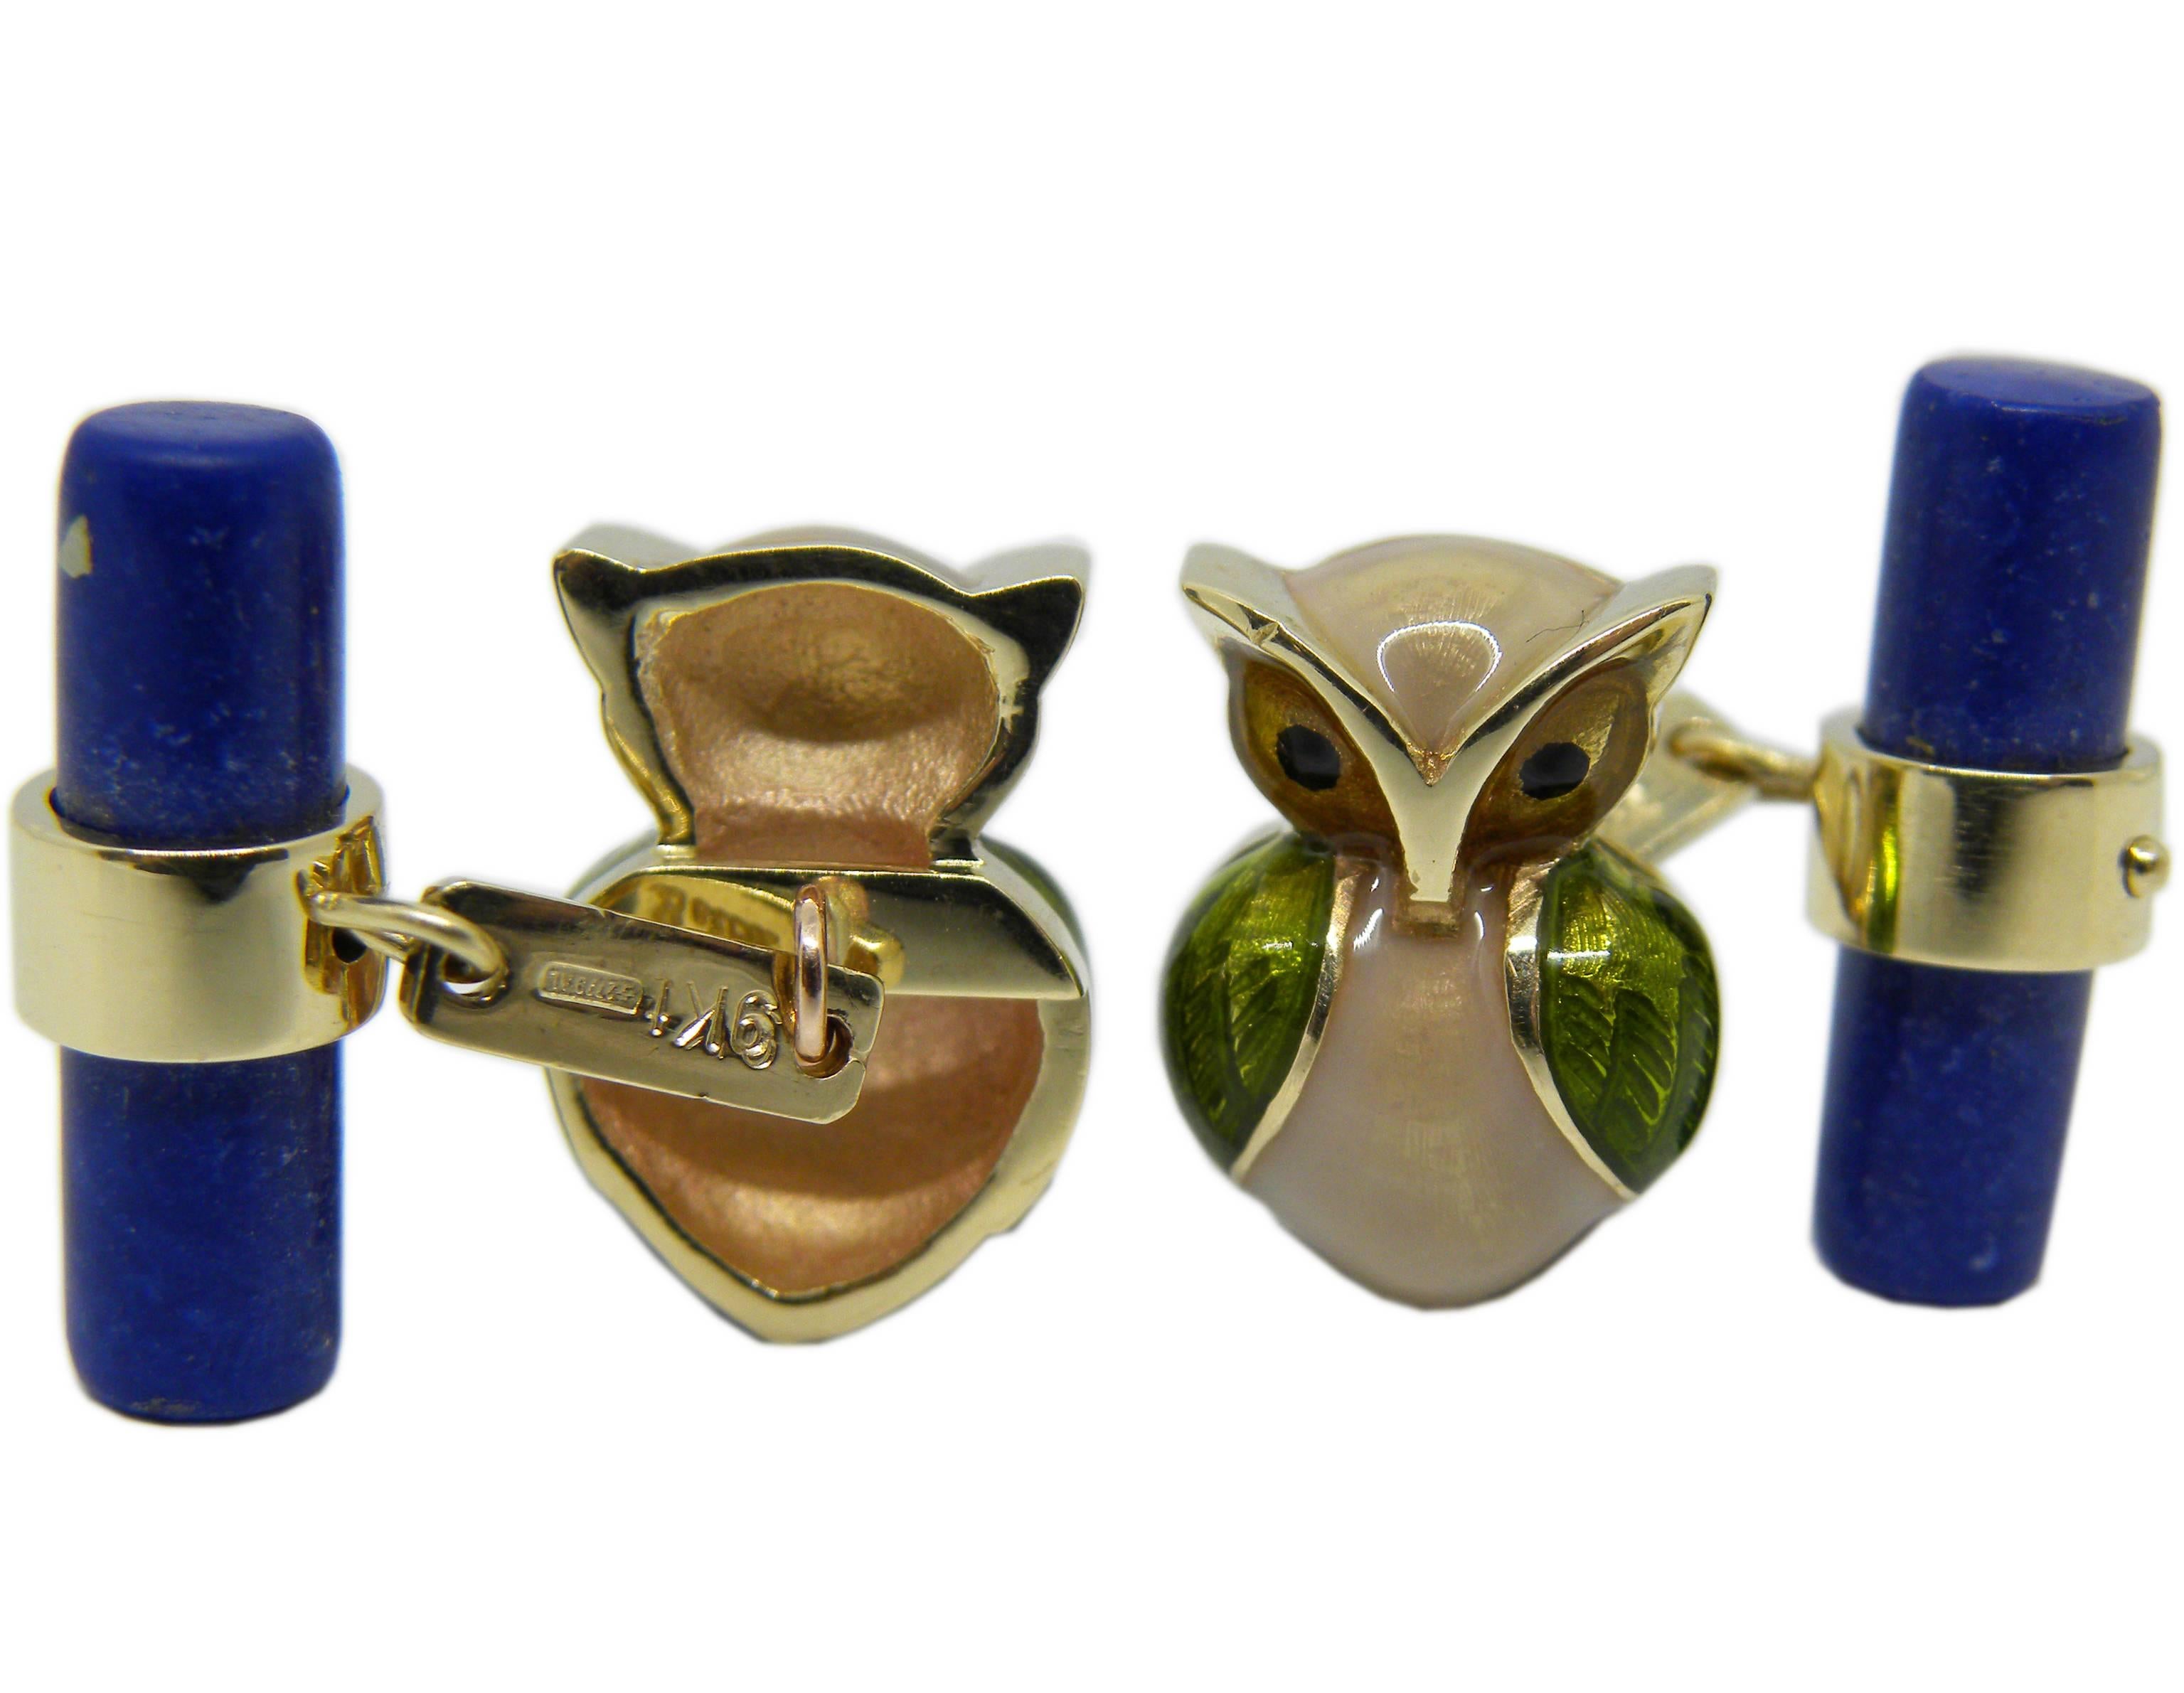 Smart Hand Enamelled Little Owl Shaped Lapis Stick Back Cufflinks, 6.30g 9Carat Yellow Gold Setting.

A fitted smart black box and pouch are included
Owl Size 16x11mm